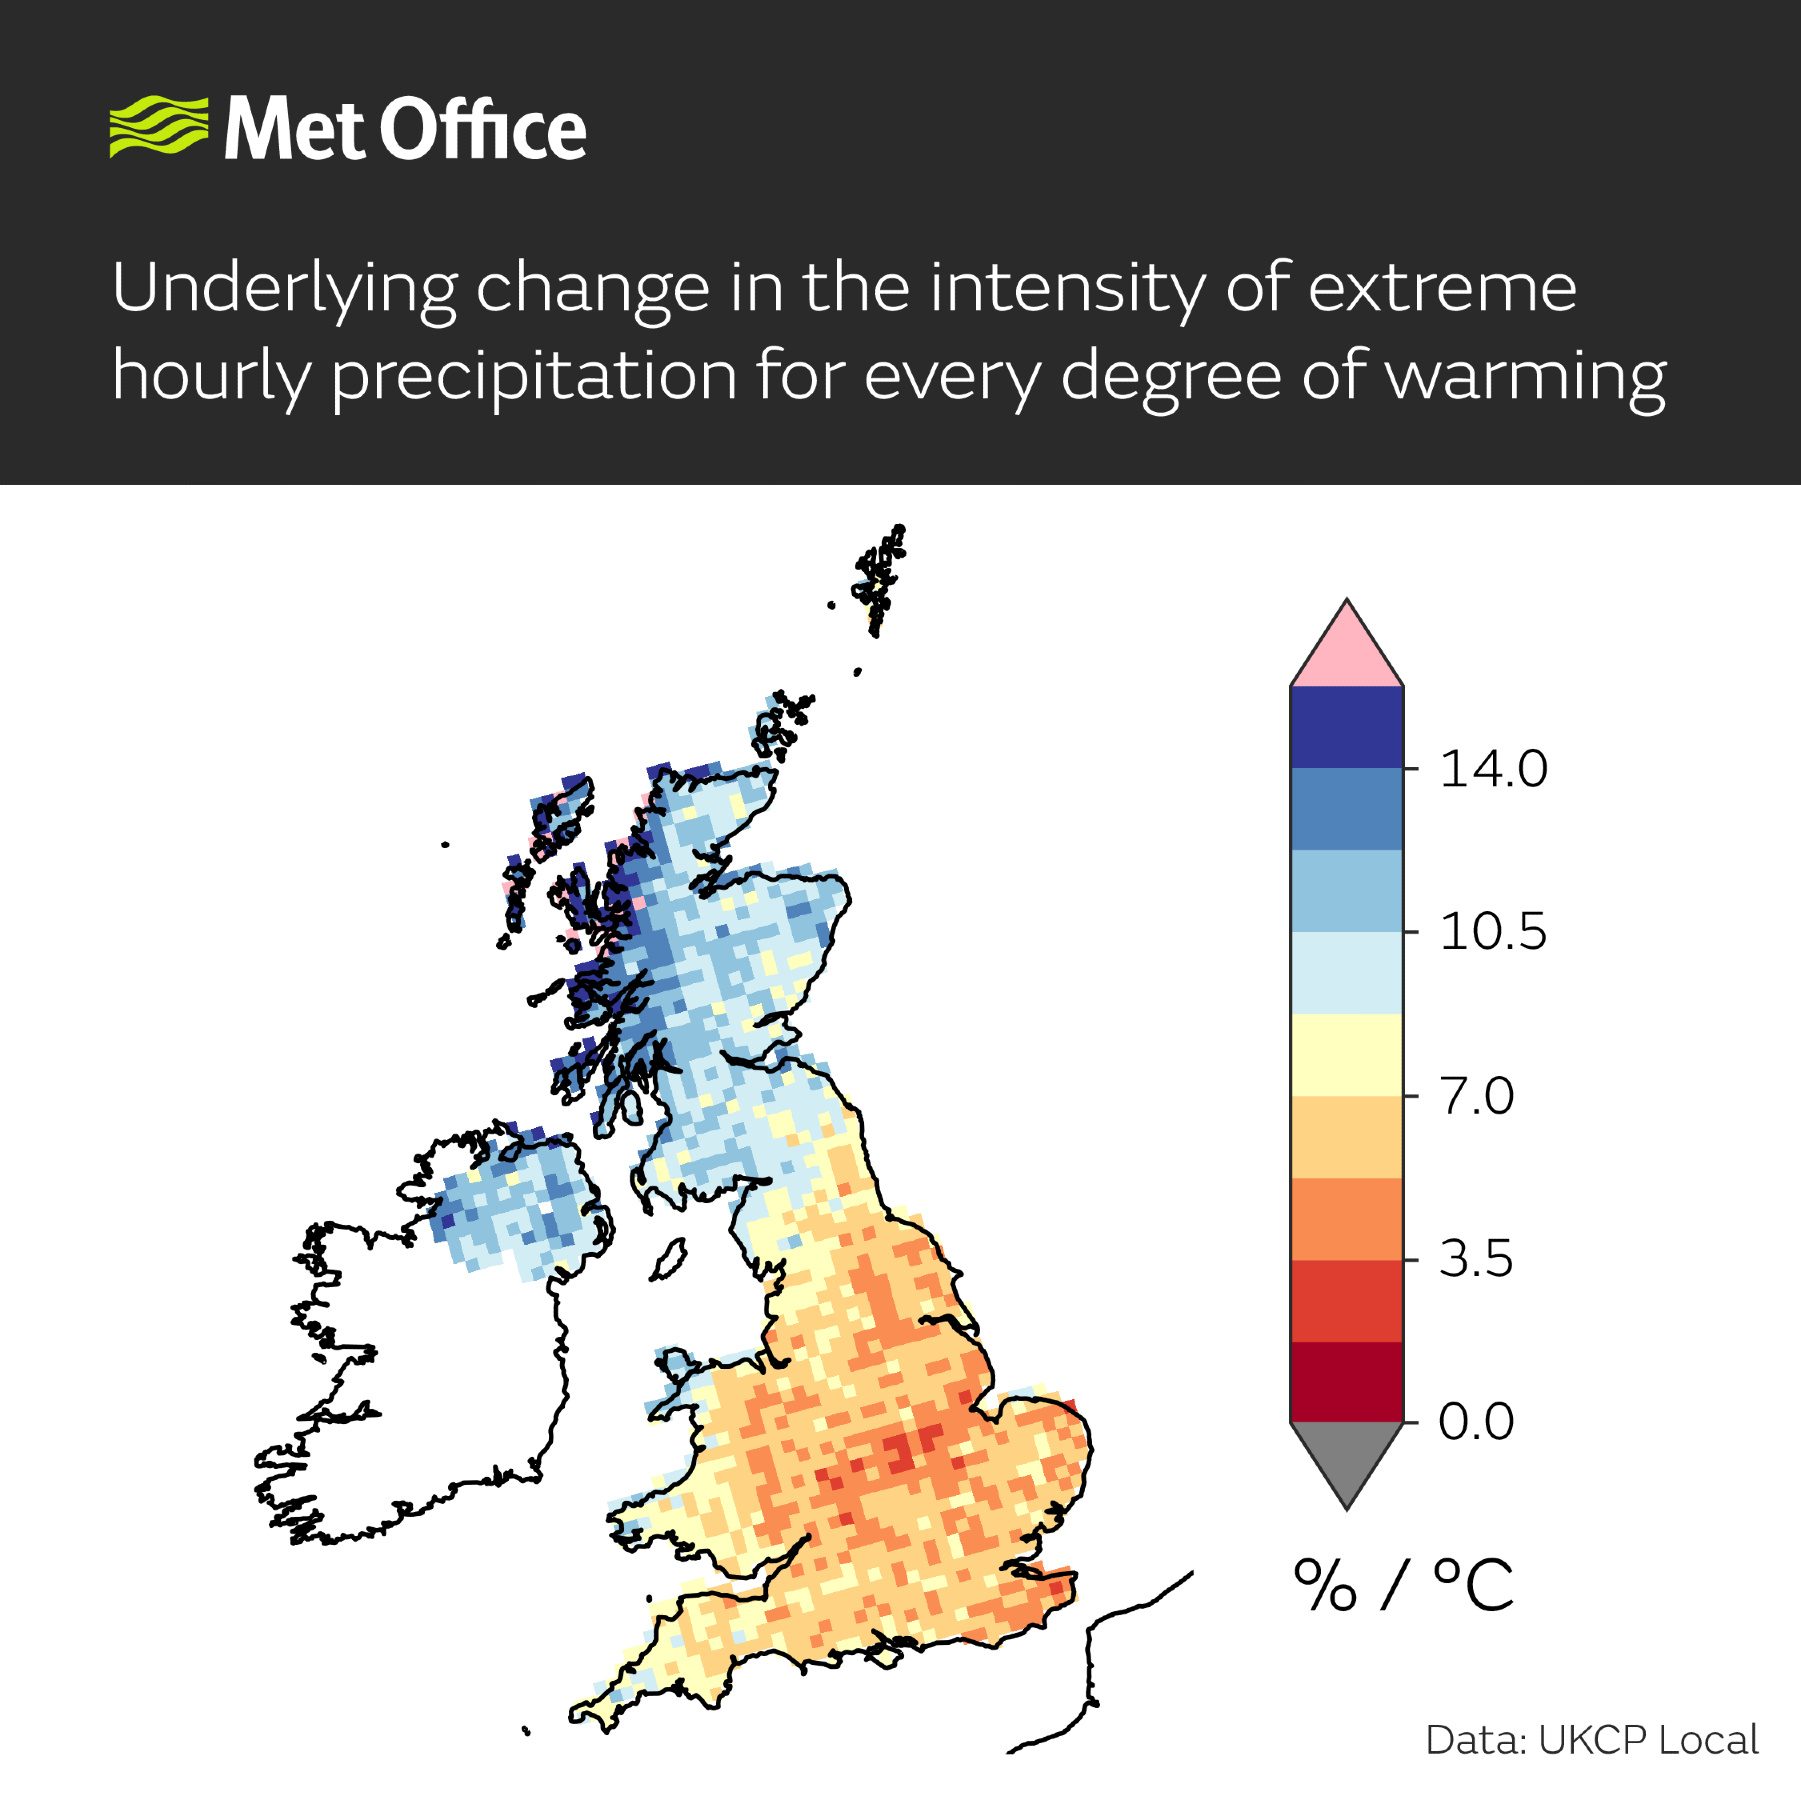 Map of the UK to show the underlying change in the intensity of extreme hourly precipitation in the UK for every degree of warming. It shows how the scale of precipitation increases for every degree of local warming. This is not even across the UK with the northwest seeing up to 15% more rain per degree and the southeast closer to 5%. There is a graduated increase from southeast to northwest.